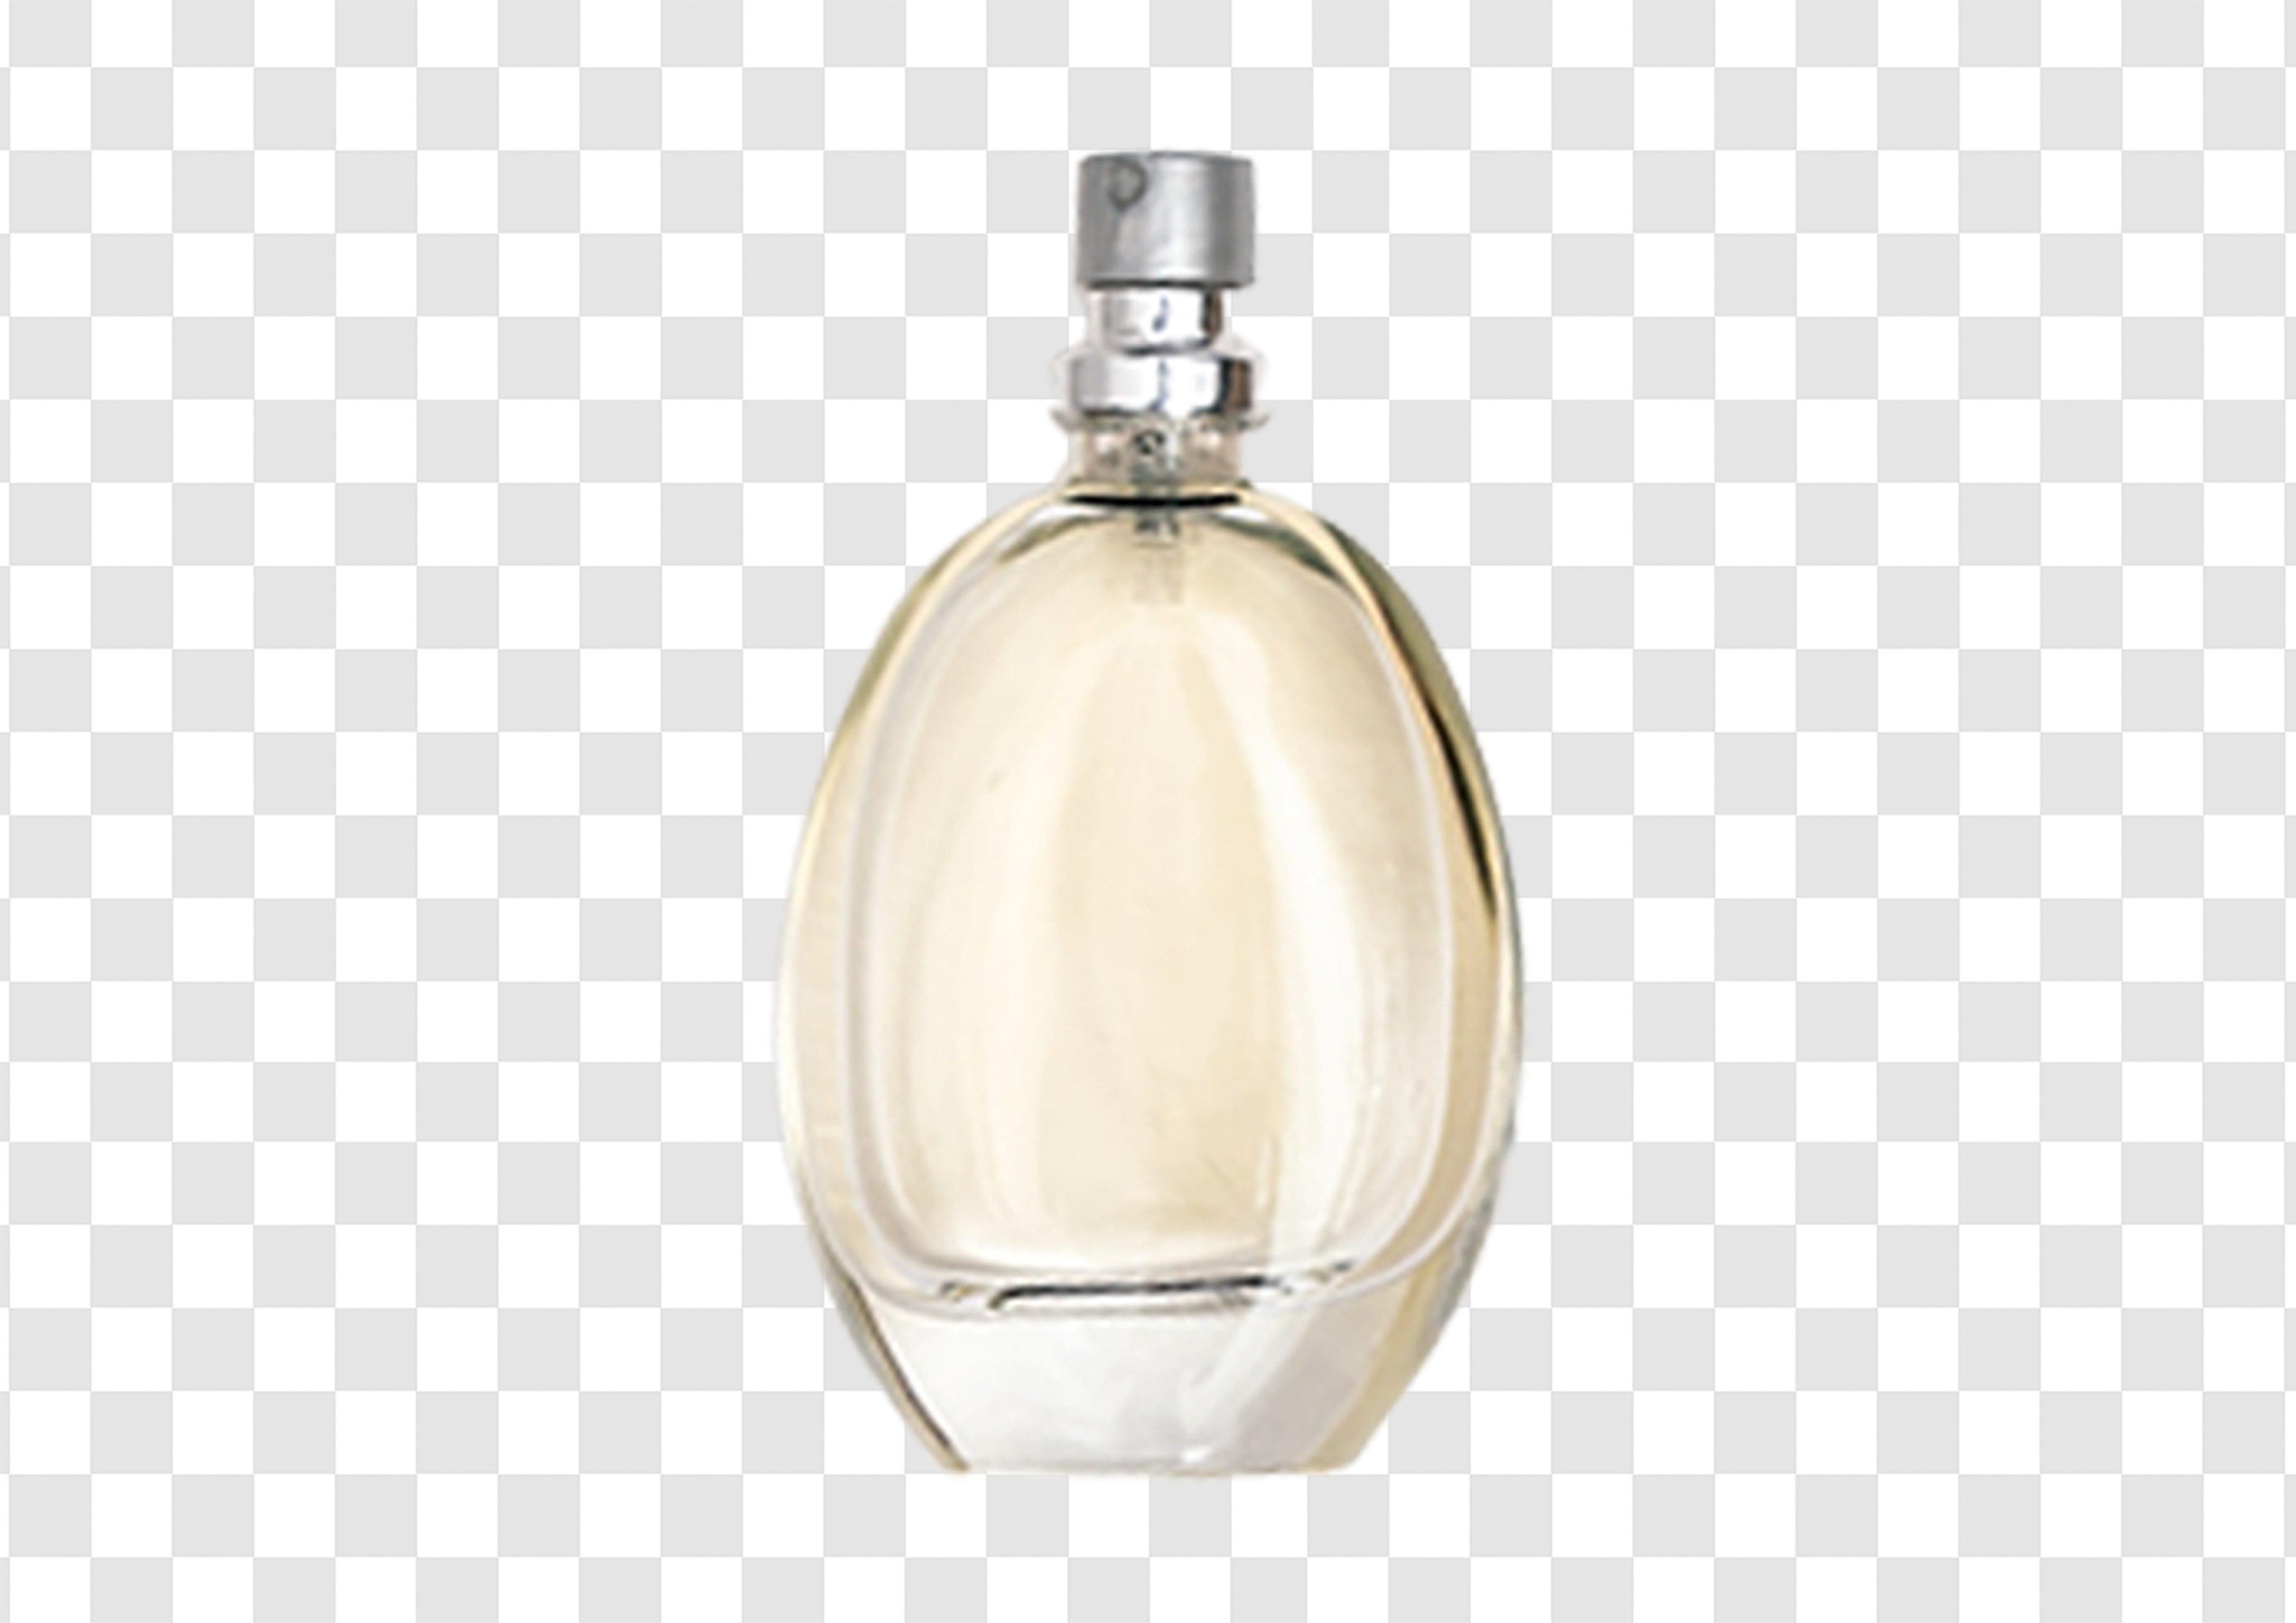 #2281 Perfume Bottle Isolated Graphic by Kzara Visual · Creative Fabrica